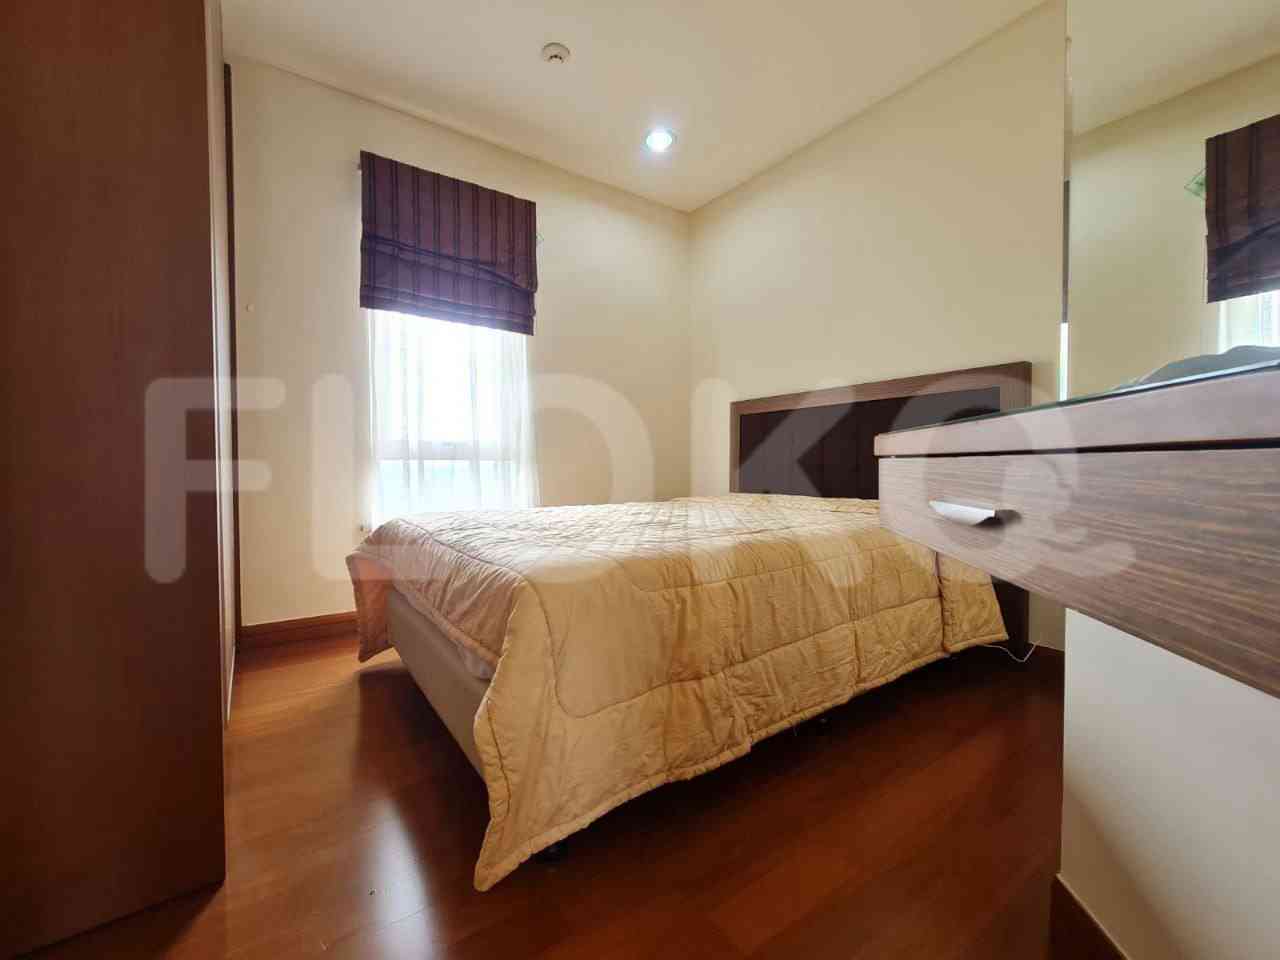 3 Bedroom on 20th Floor for Rent in Permata Hijau Residence - fpe694 3